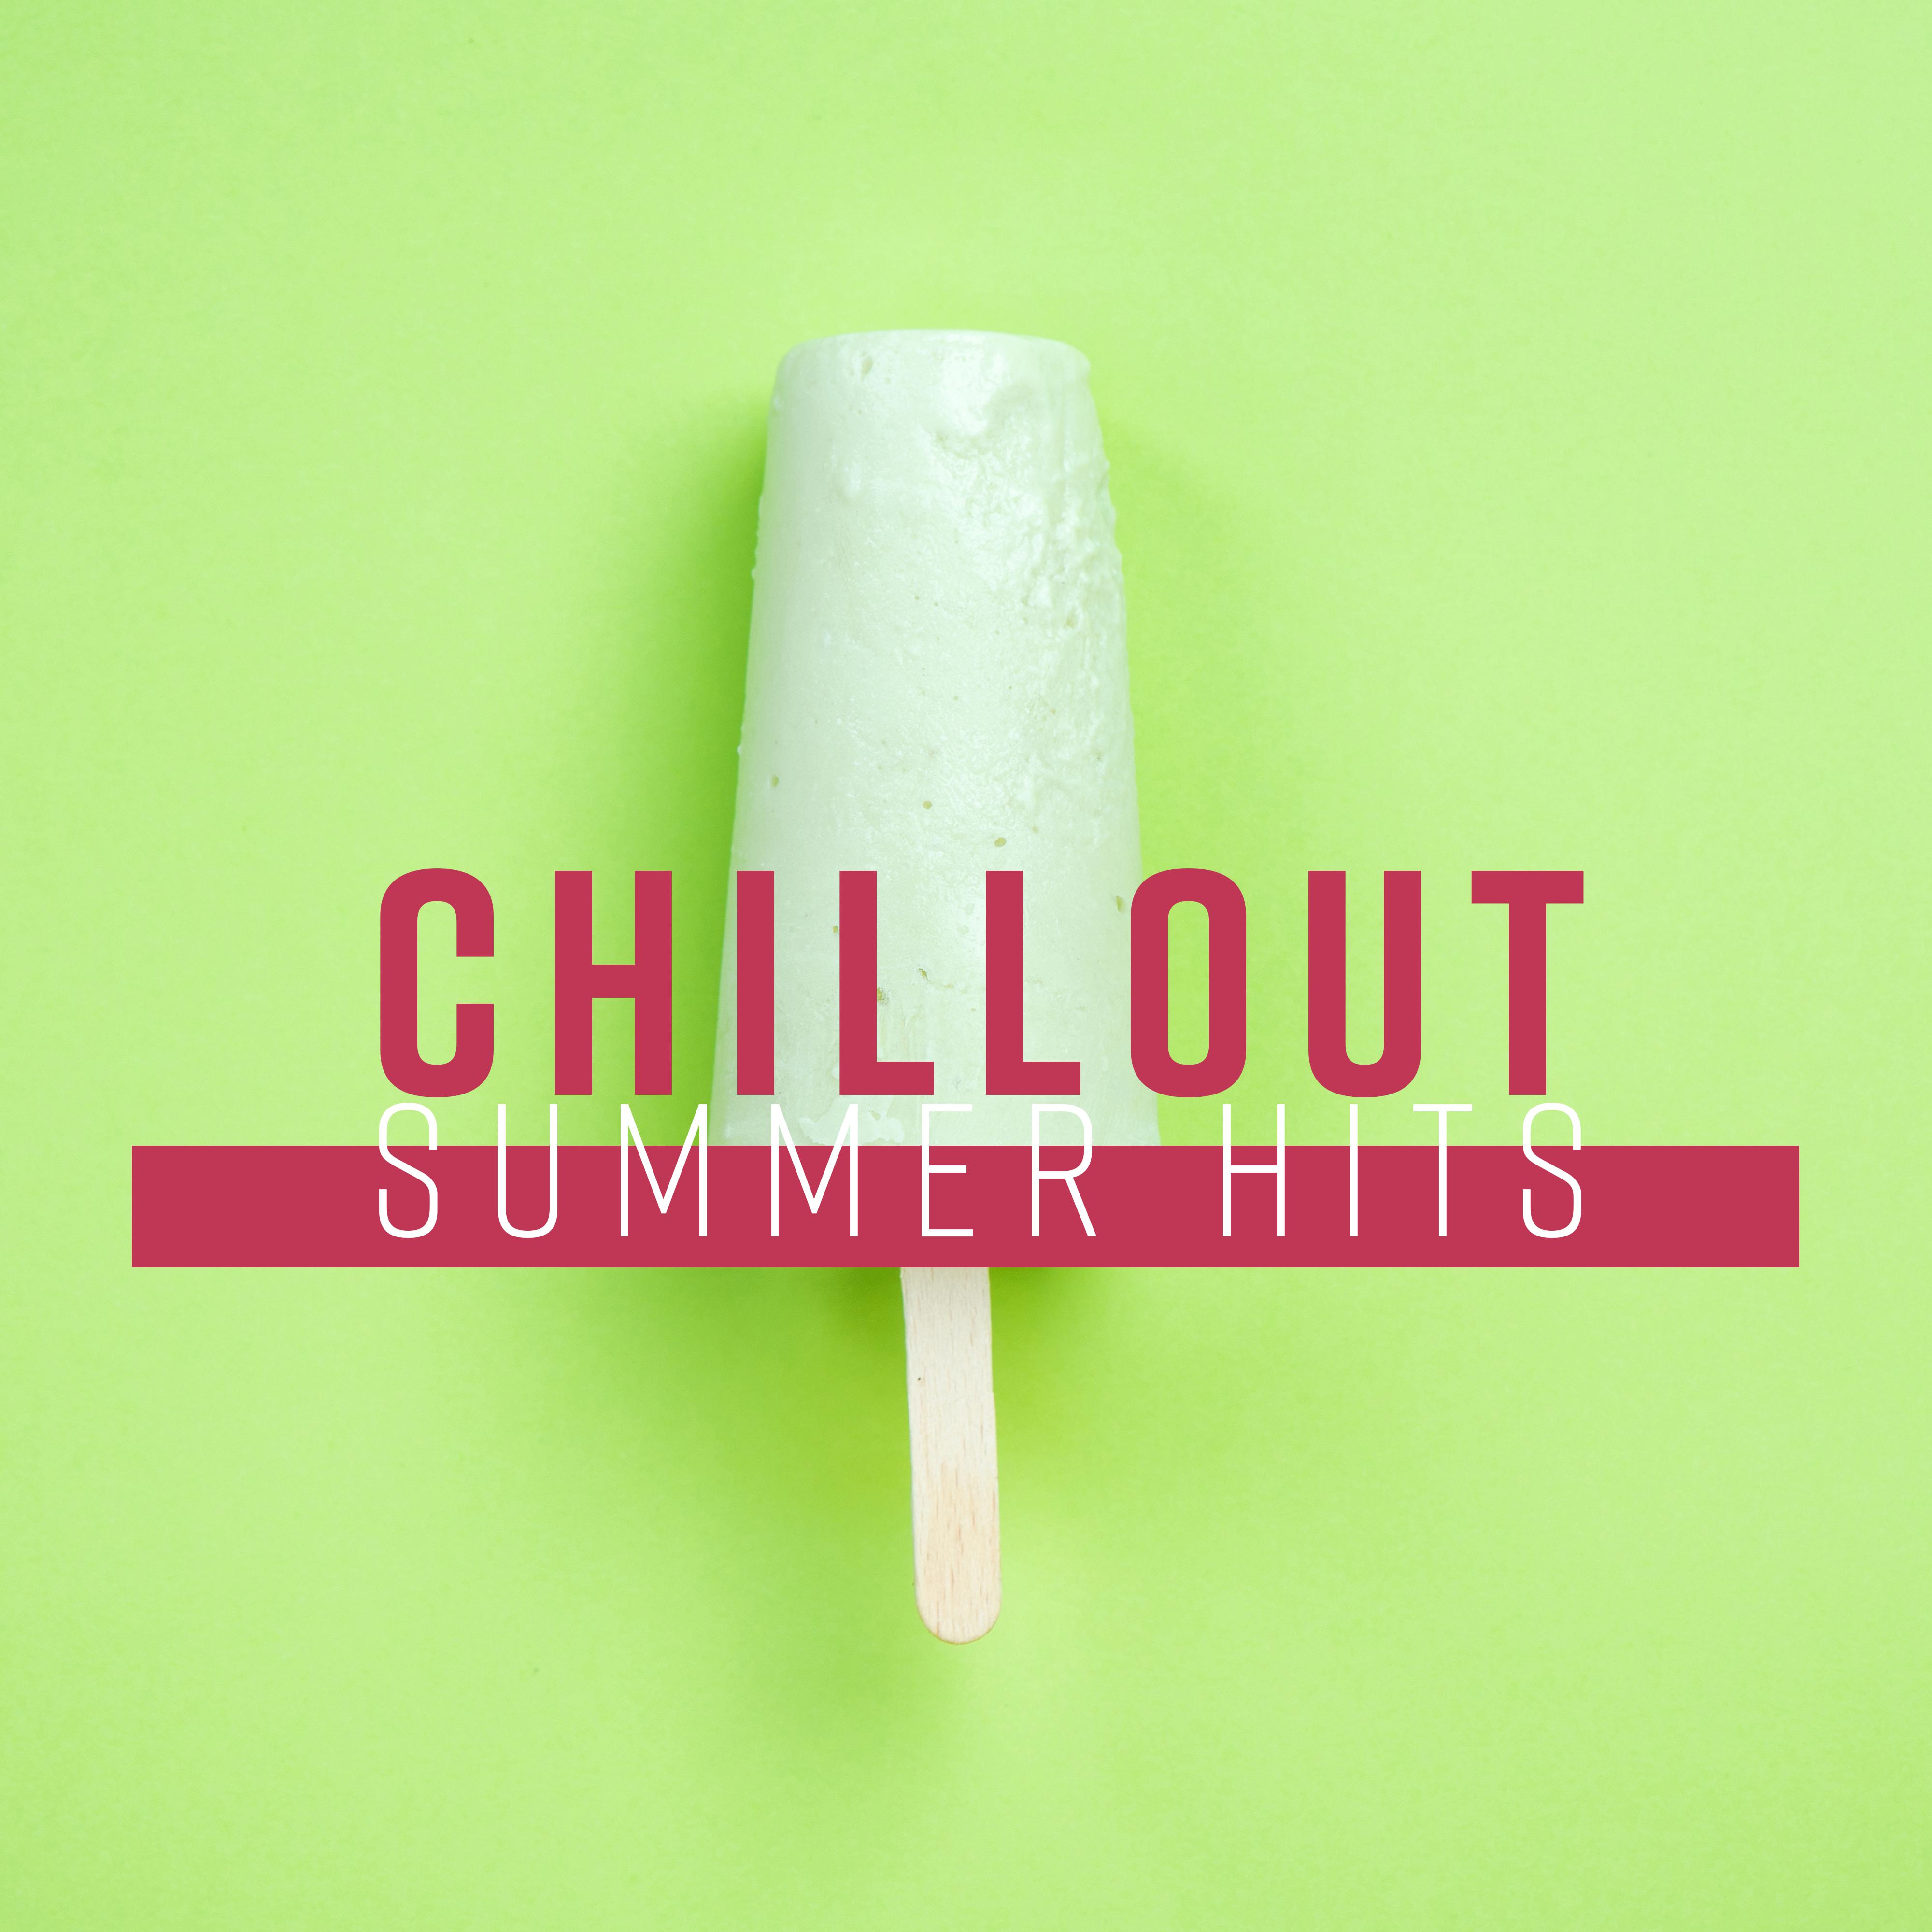 Chillout Summer Hits